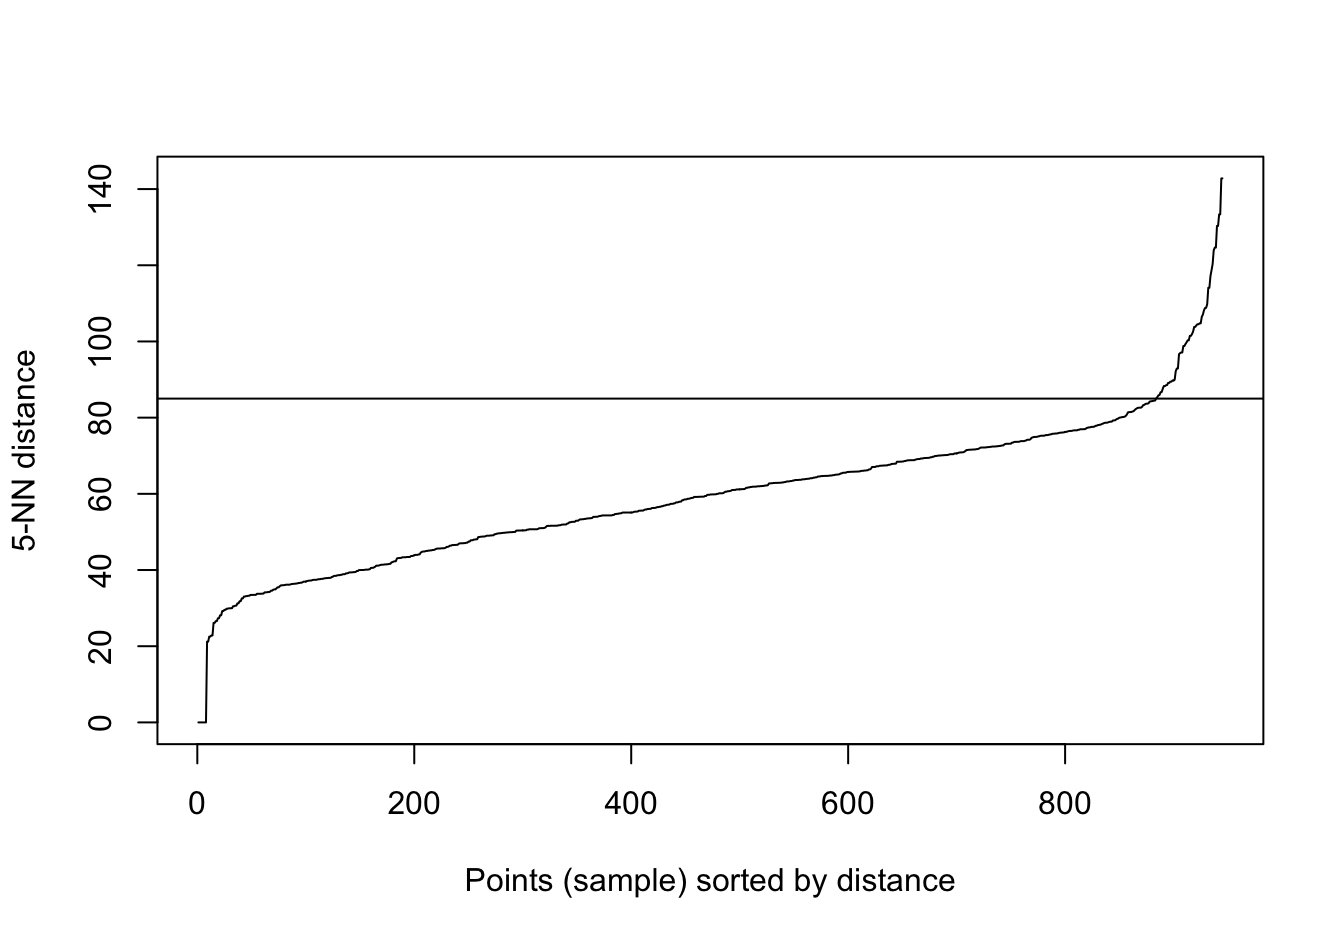 Five-nearest neighbour distances for the gene expression profiling of human tissues data set.